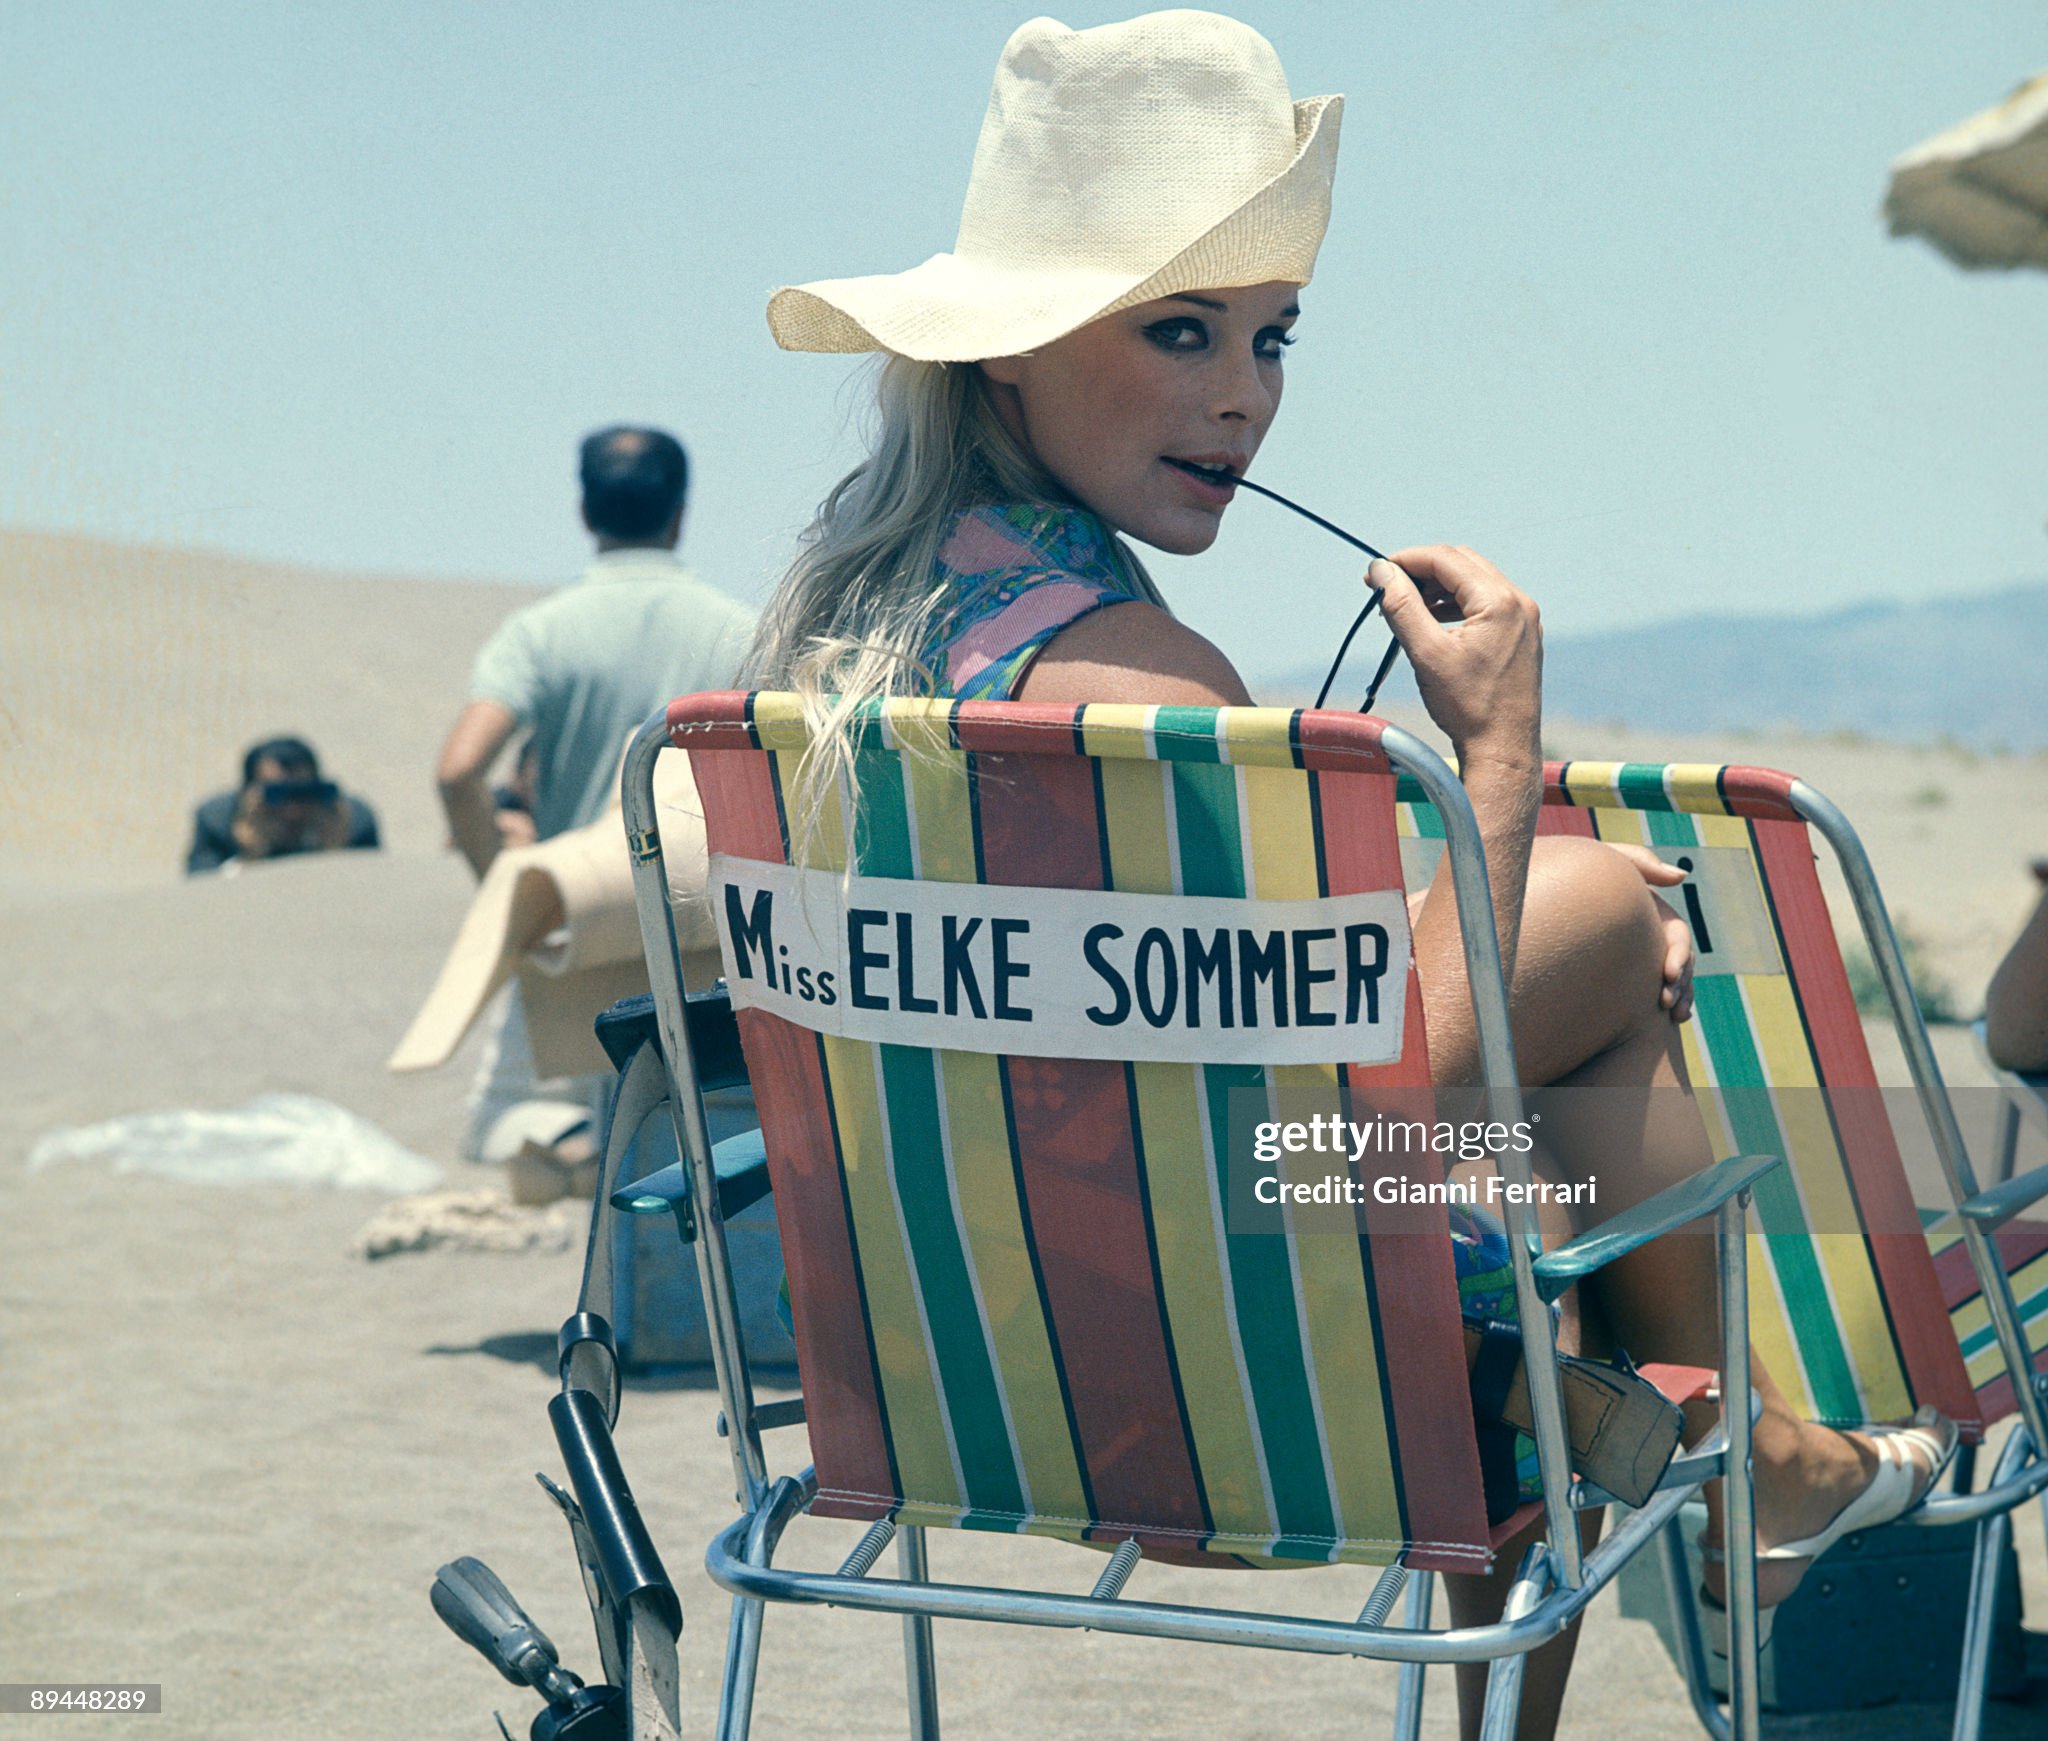 The actress Elke Sommer during a rest in the filming of the movie 'Las Vegas 500 millones' in Almeria, Andalusia, Spain, in 1967. 